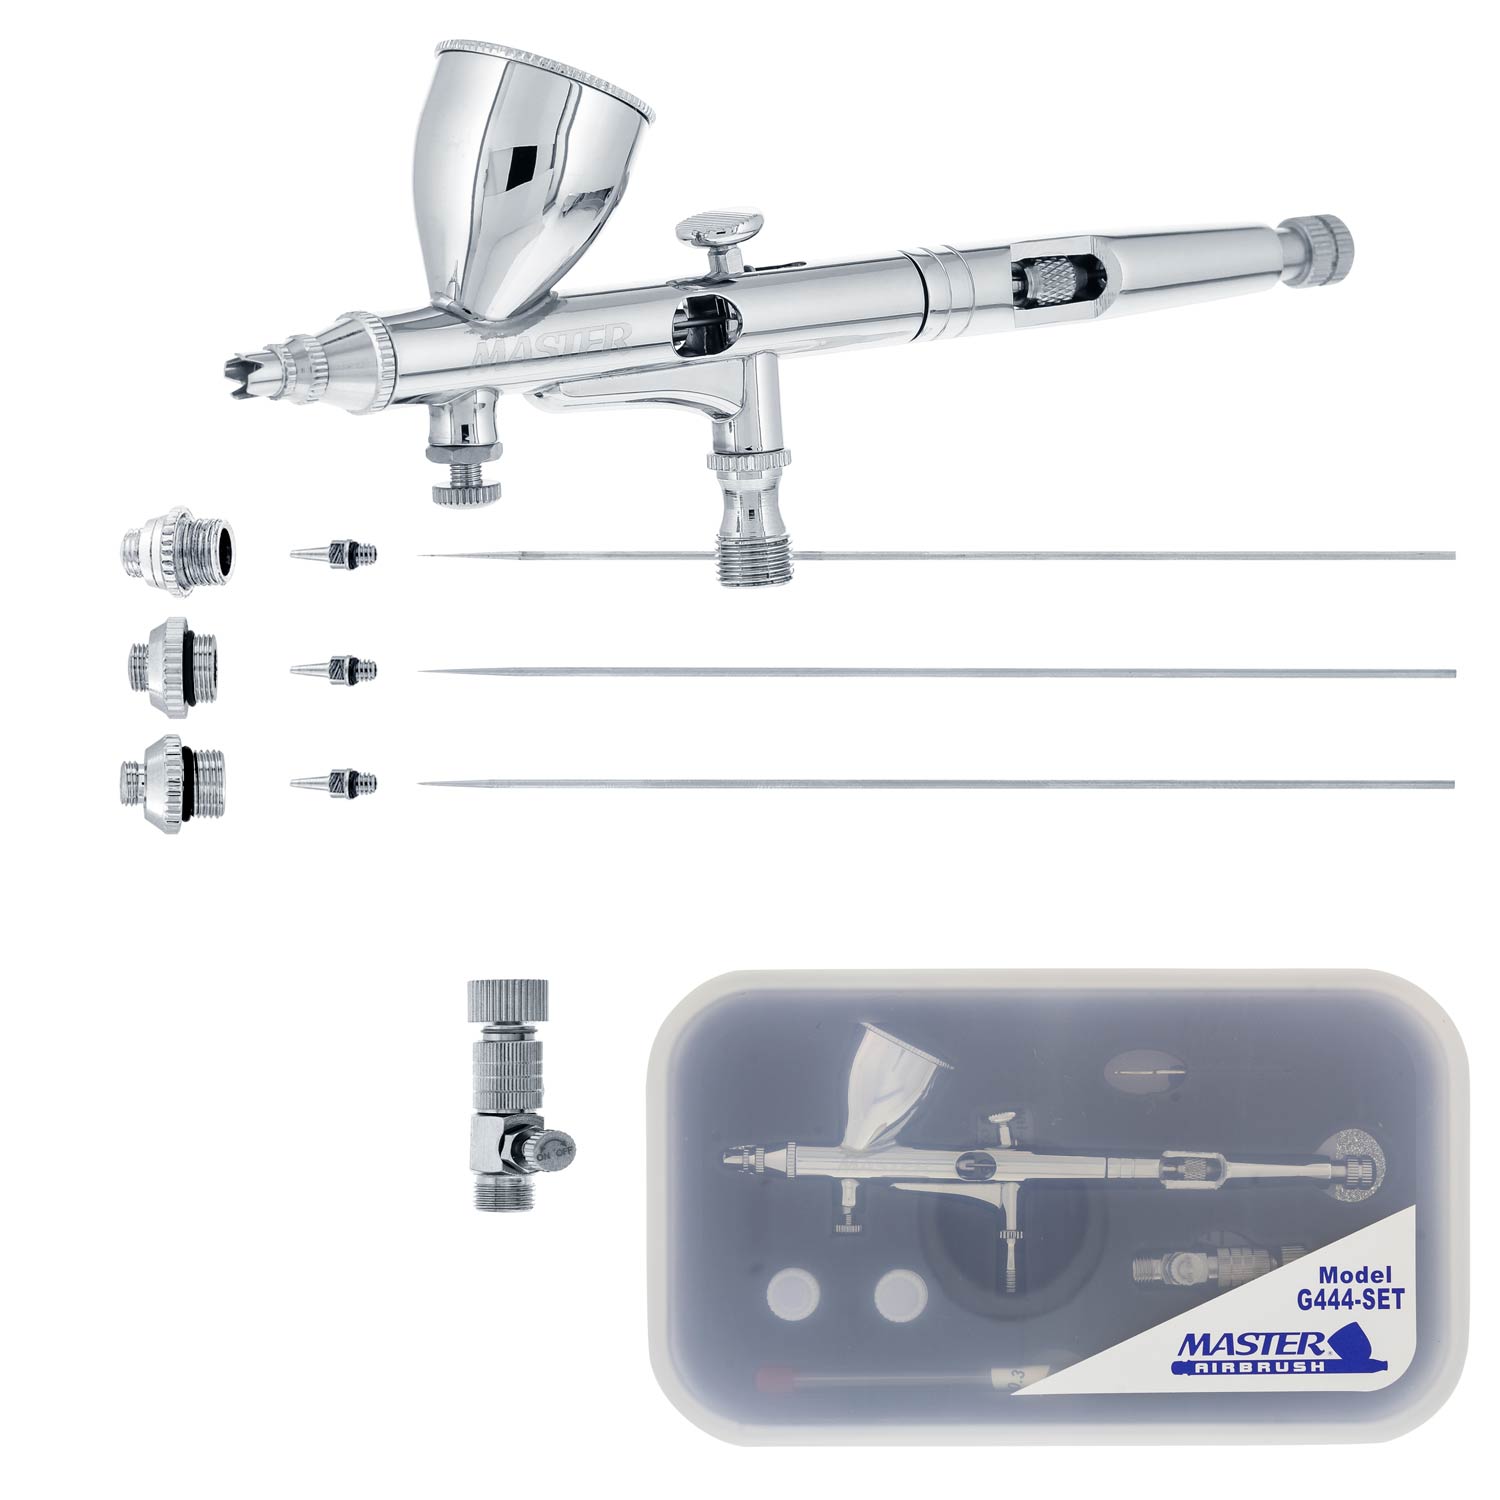 High Precision G444 Pro Set Dual-Action Gravity Feed Airbrush Set with 3 tips (0.2, 0.3 & 0.5 mm), 1/3 oz Funnel Cup, Air Control